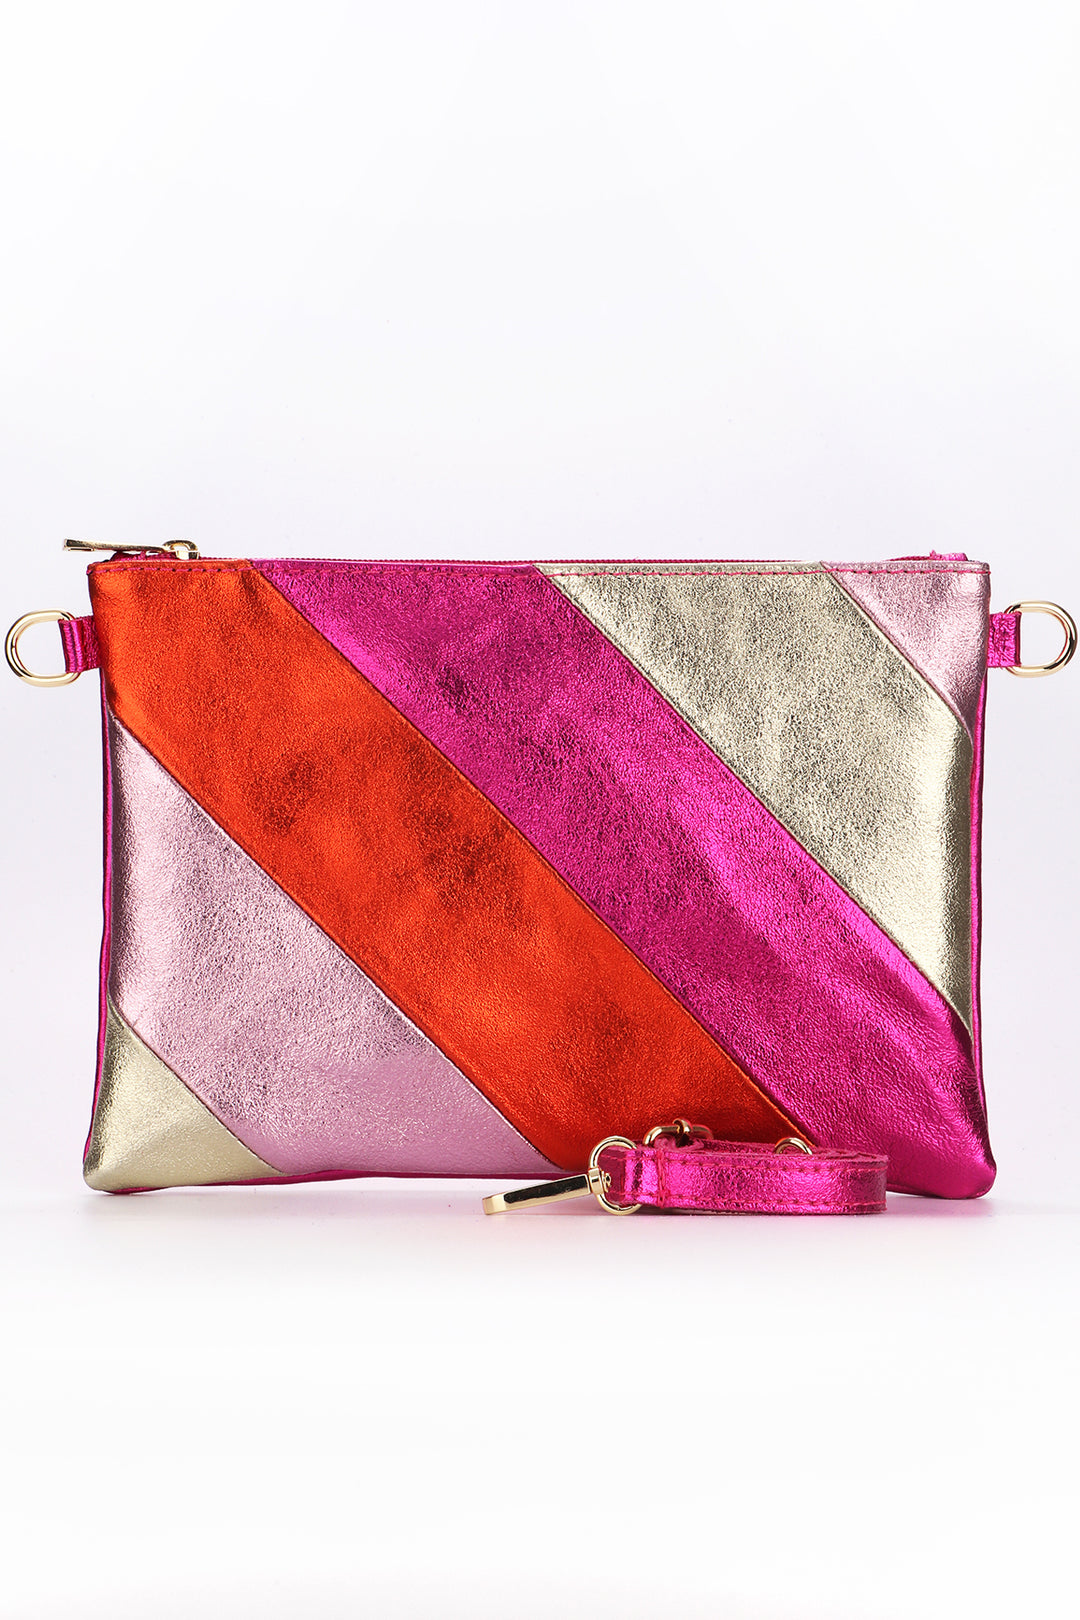 pink, gold and orange striped wristlet clutch bag made from italian leather with a detachable metallic pink wrist strap